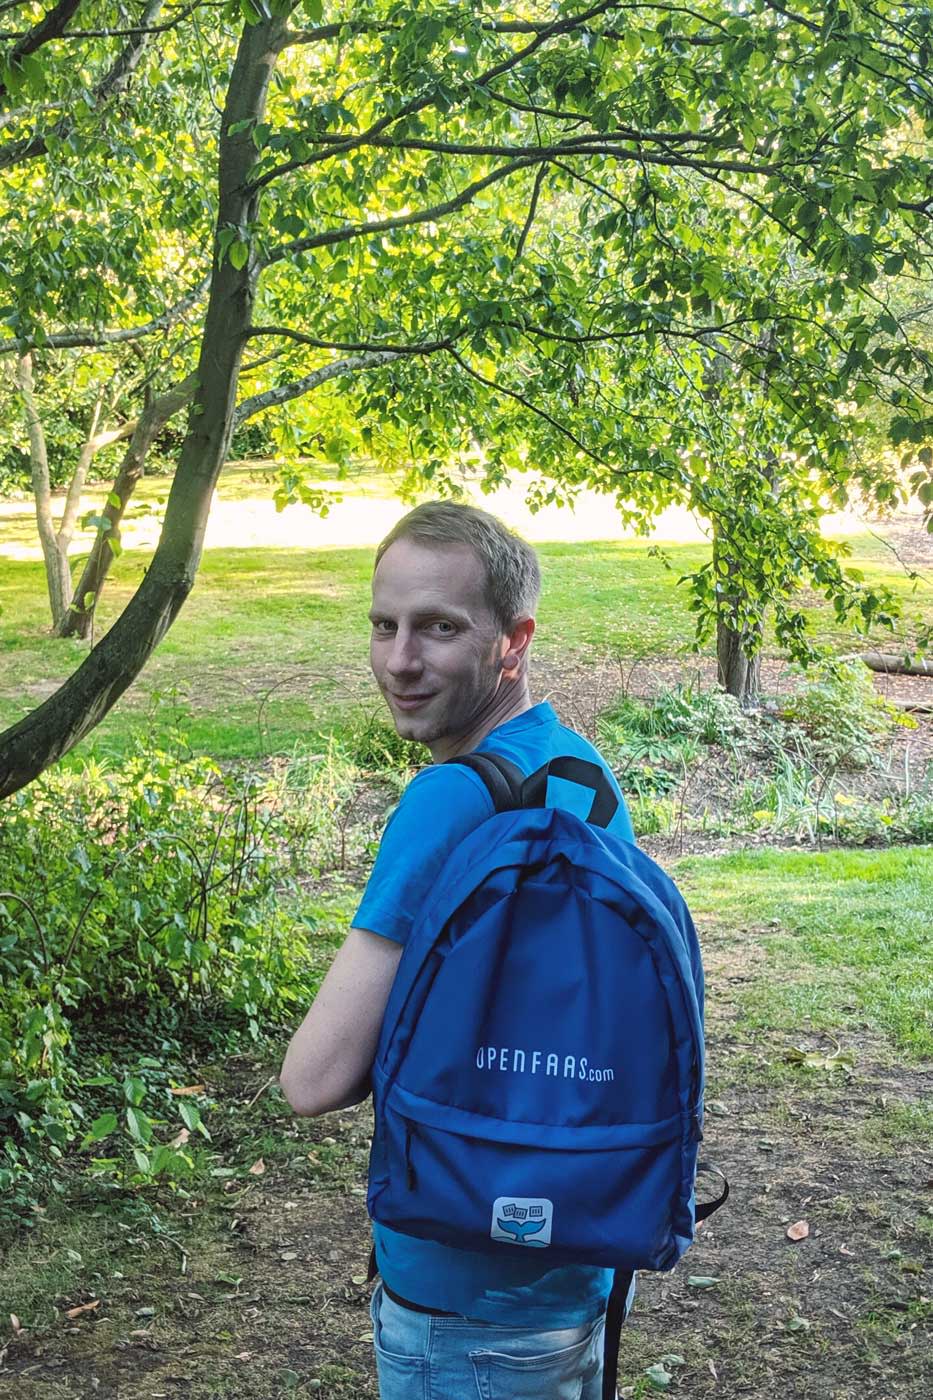 Photo of Alex Ellis surrounded by greenery, wearing an OpenFaaS branded backpack.